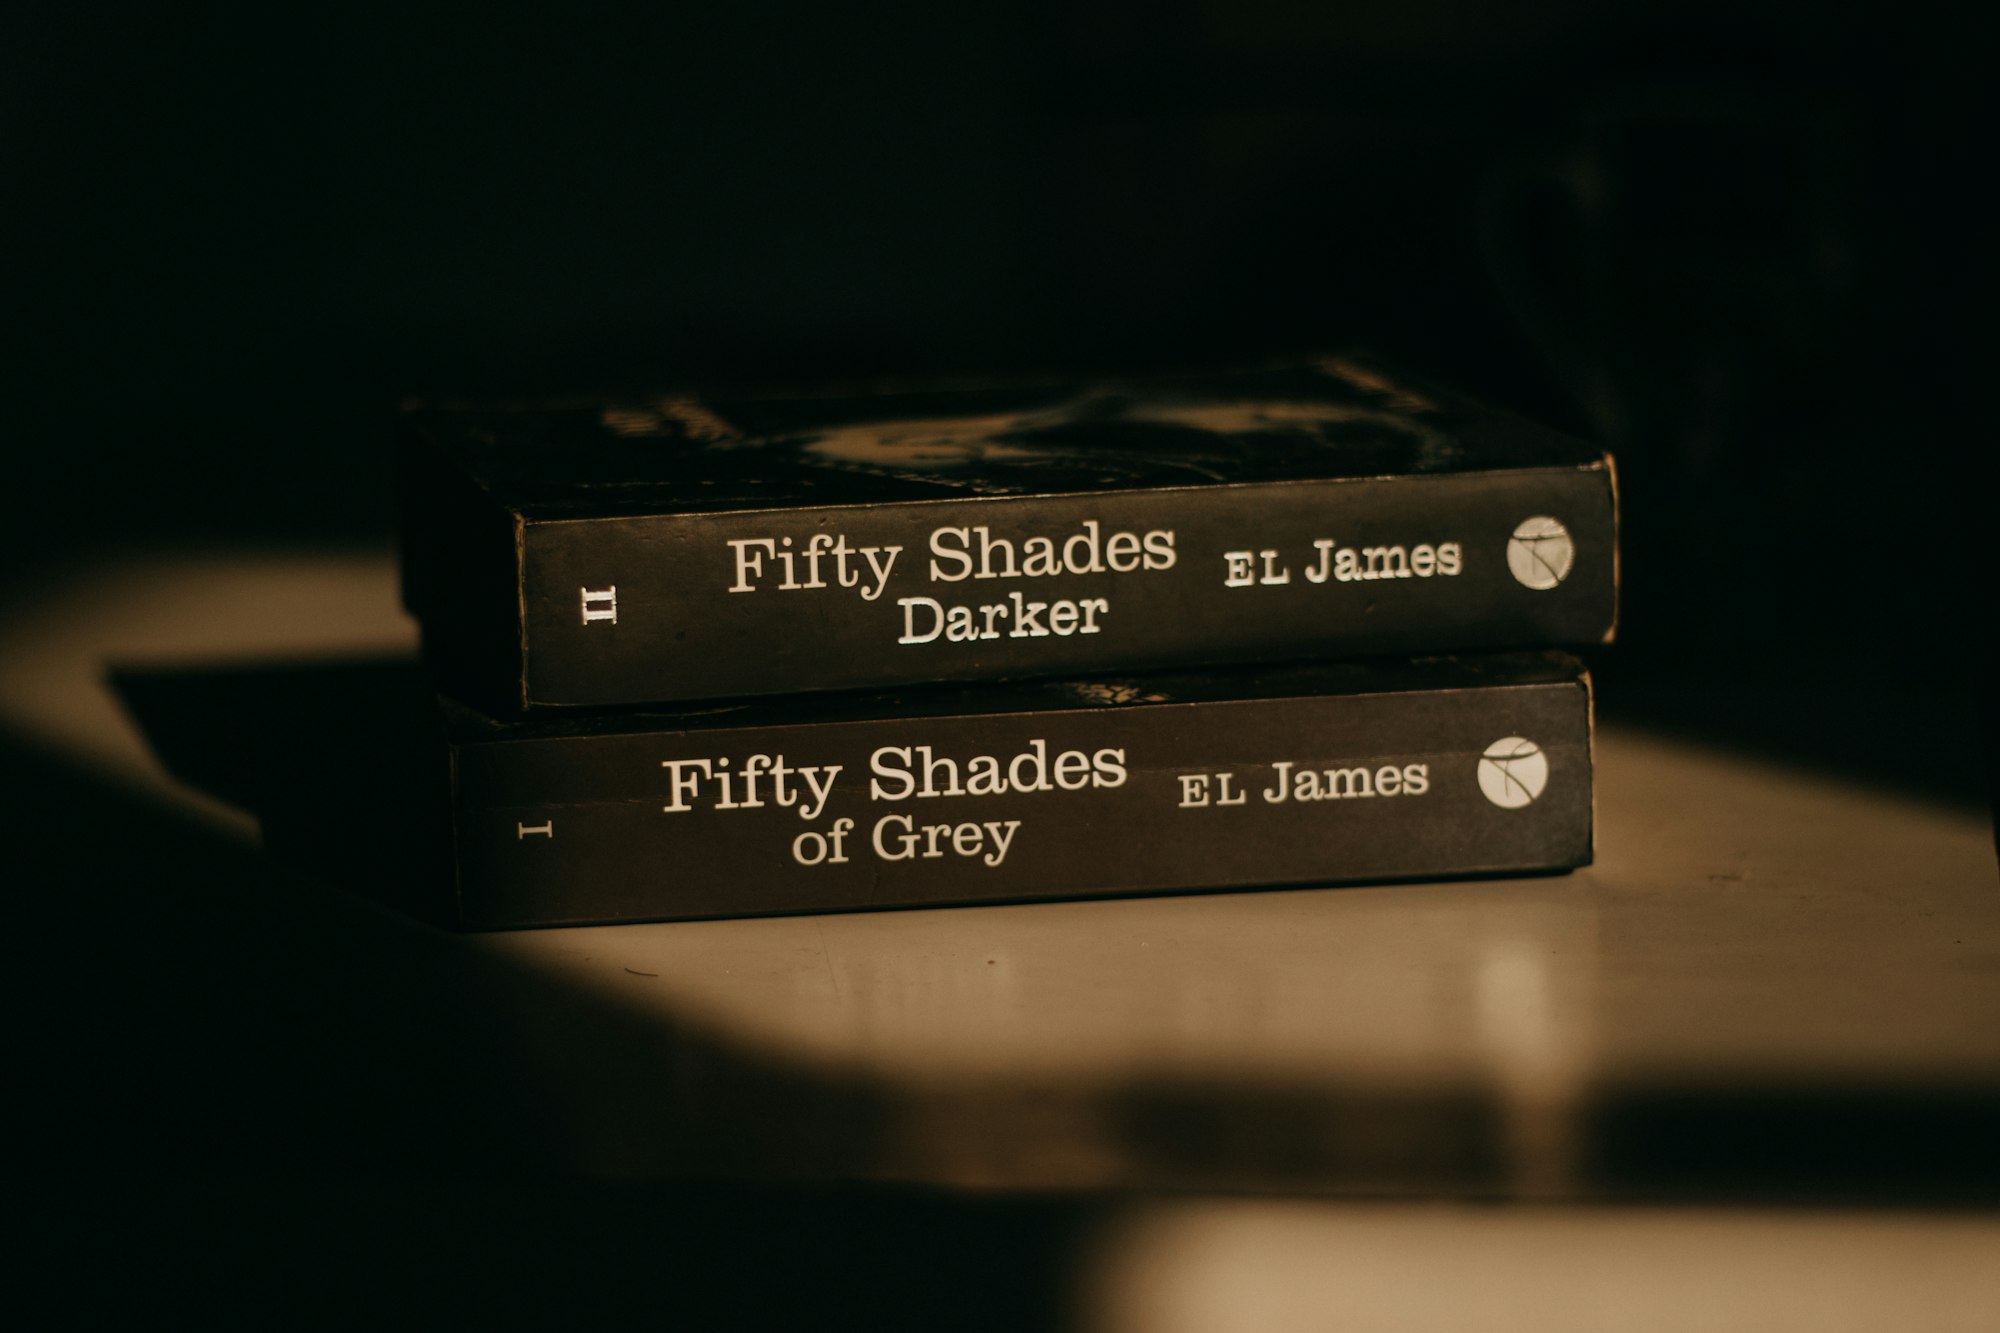 How to Watch Fifty Shades of Grey on Netflix - Top 3 VPN Alternatives